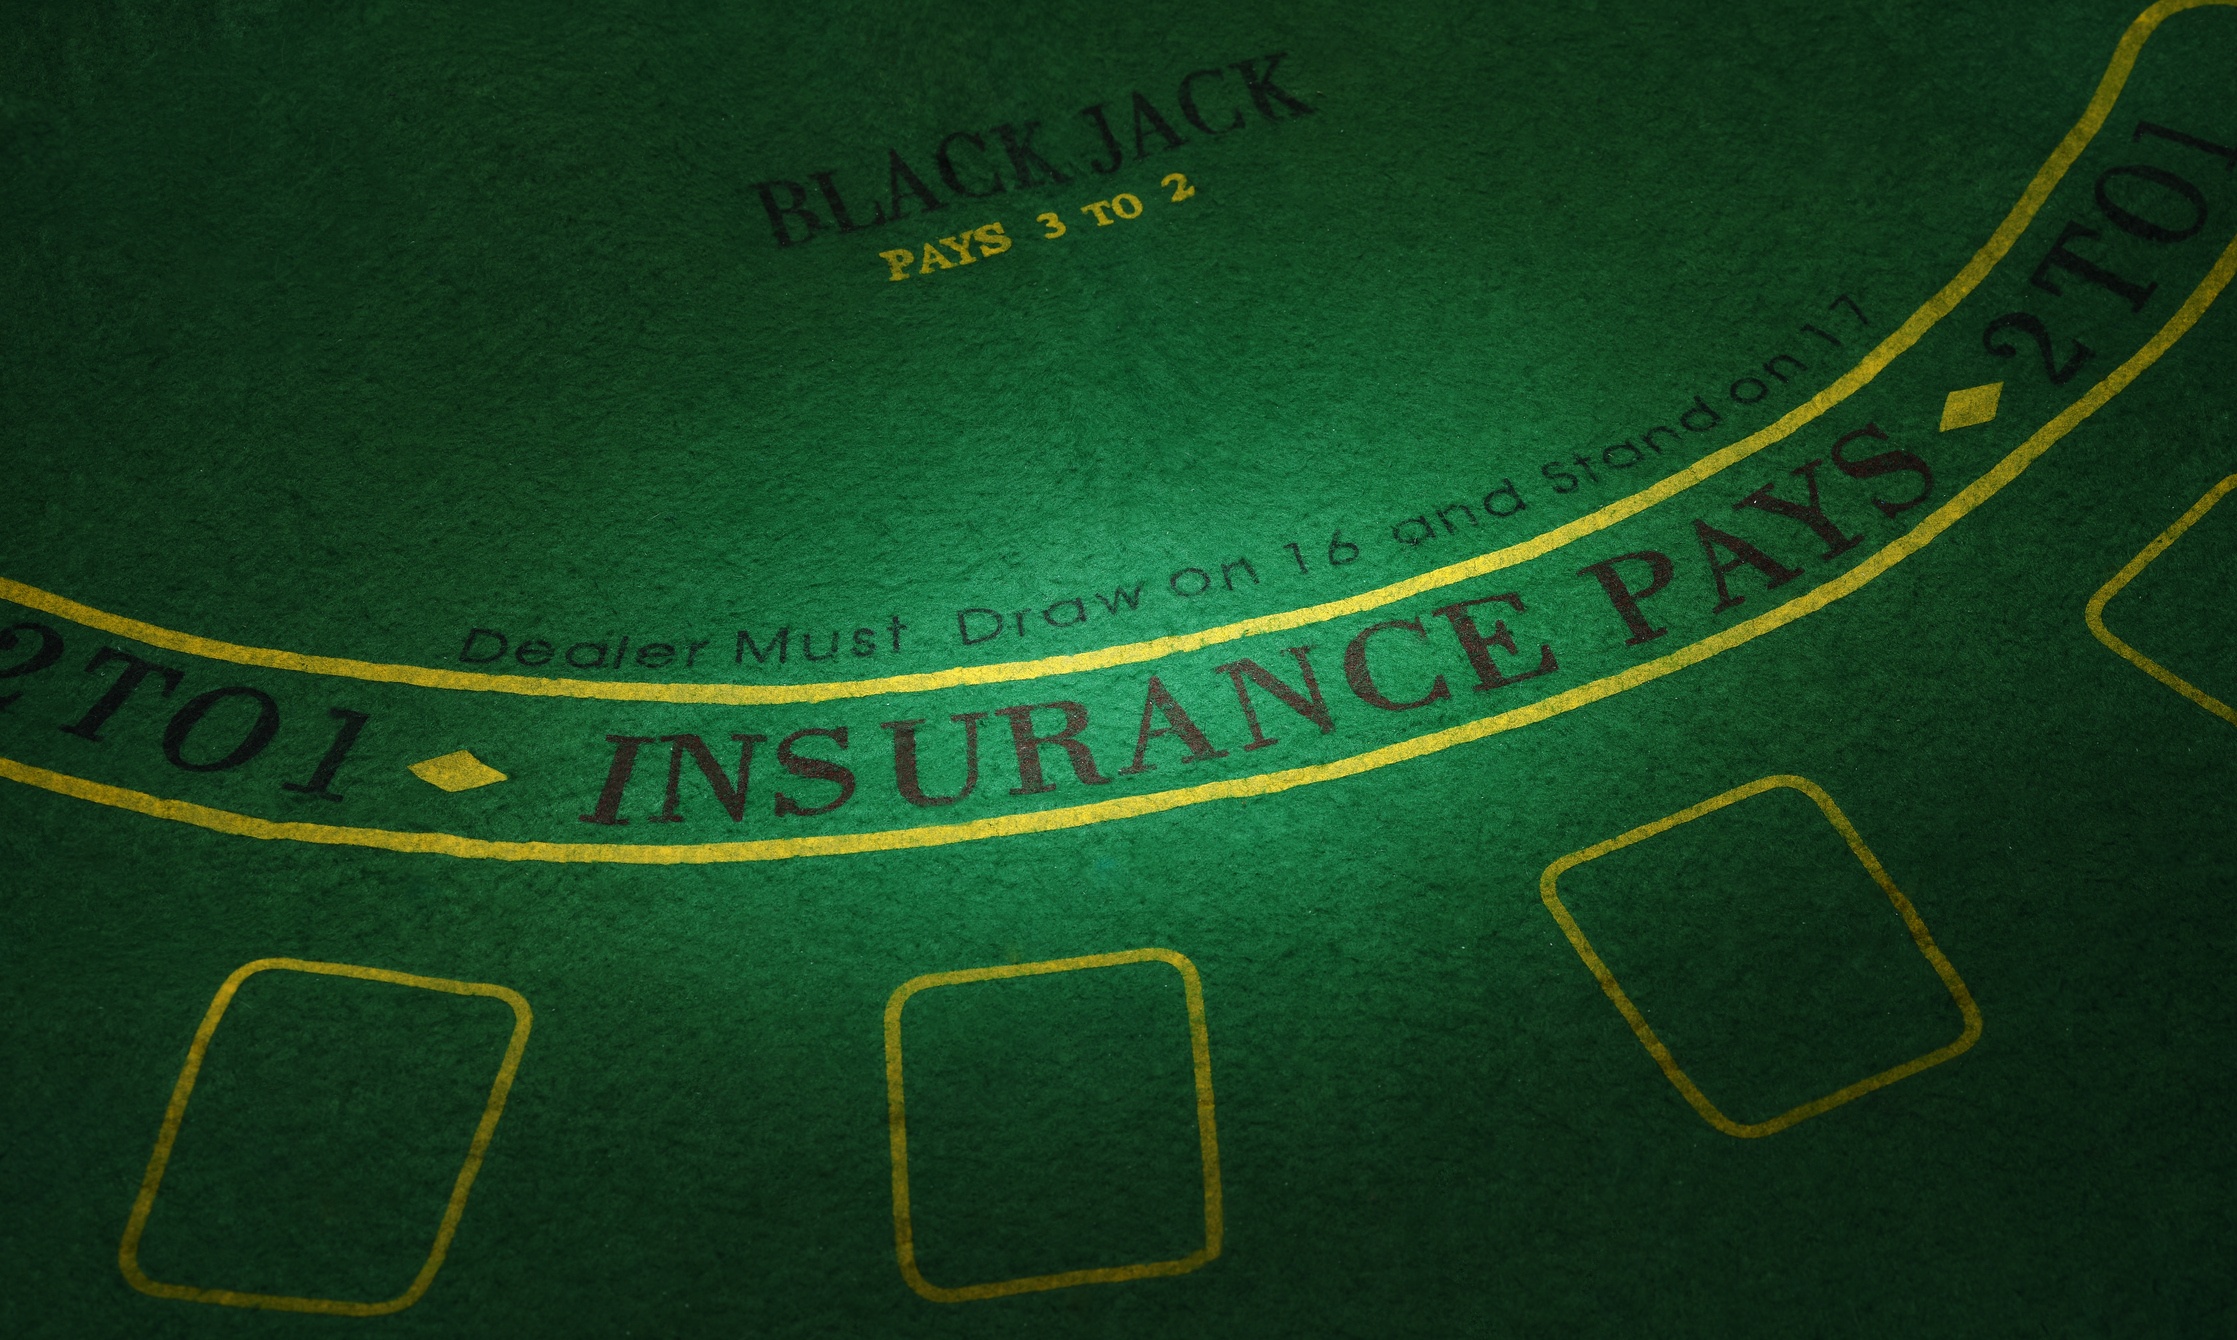 photo showing most popular blackjack game table layout